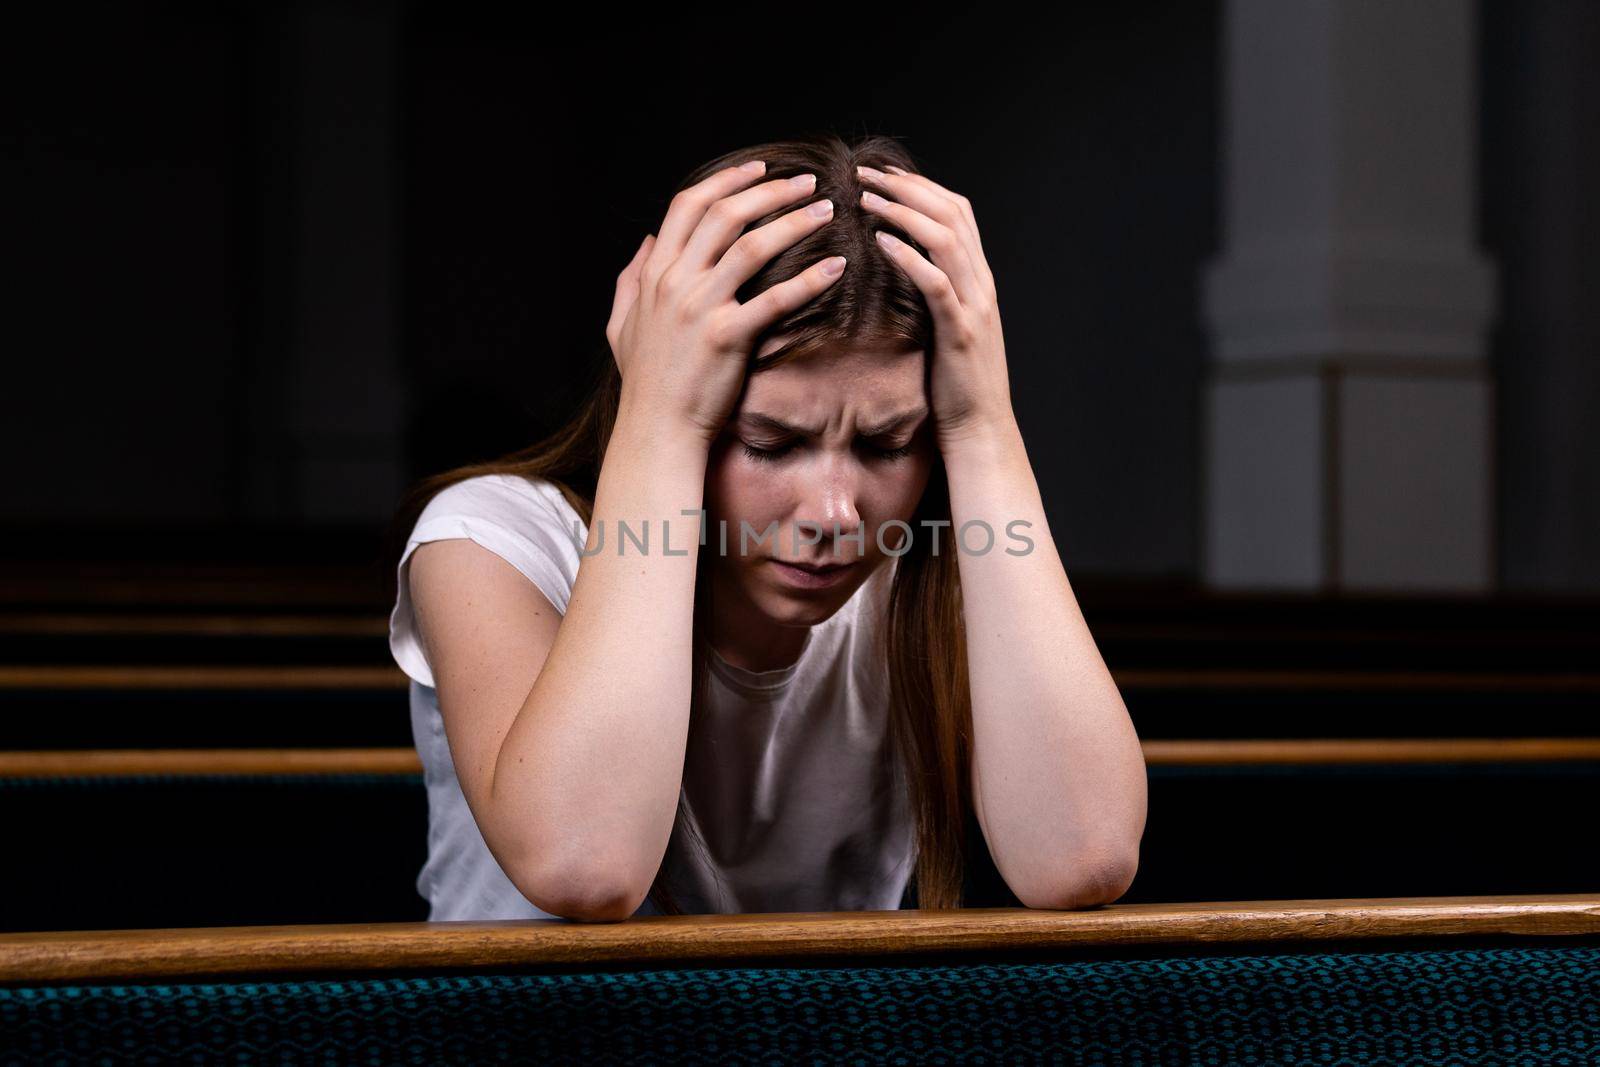 A Sad Christian girl in white shirt is sitting and praying with humble heart in the church.